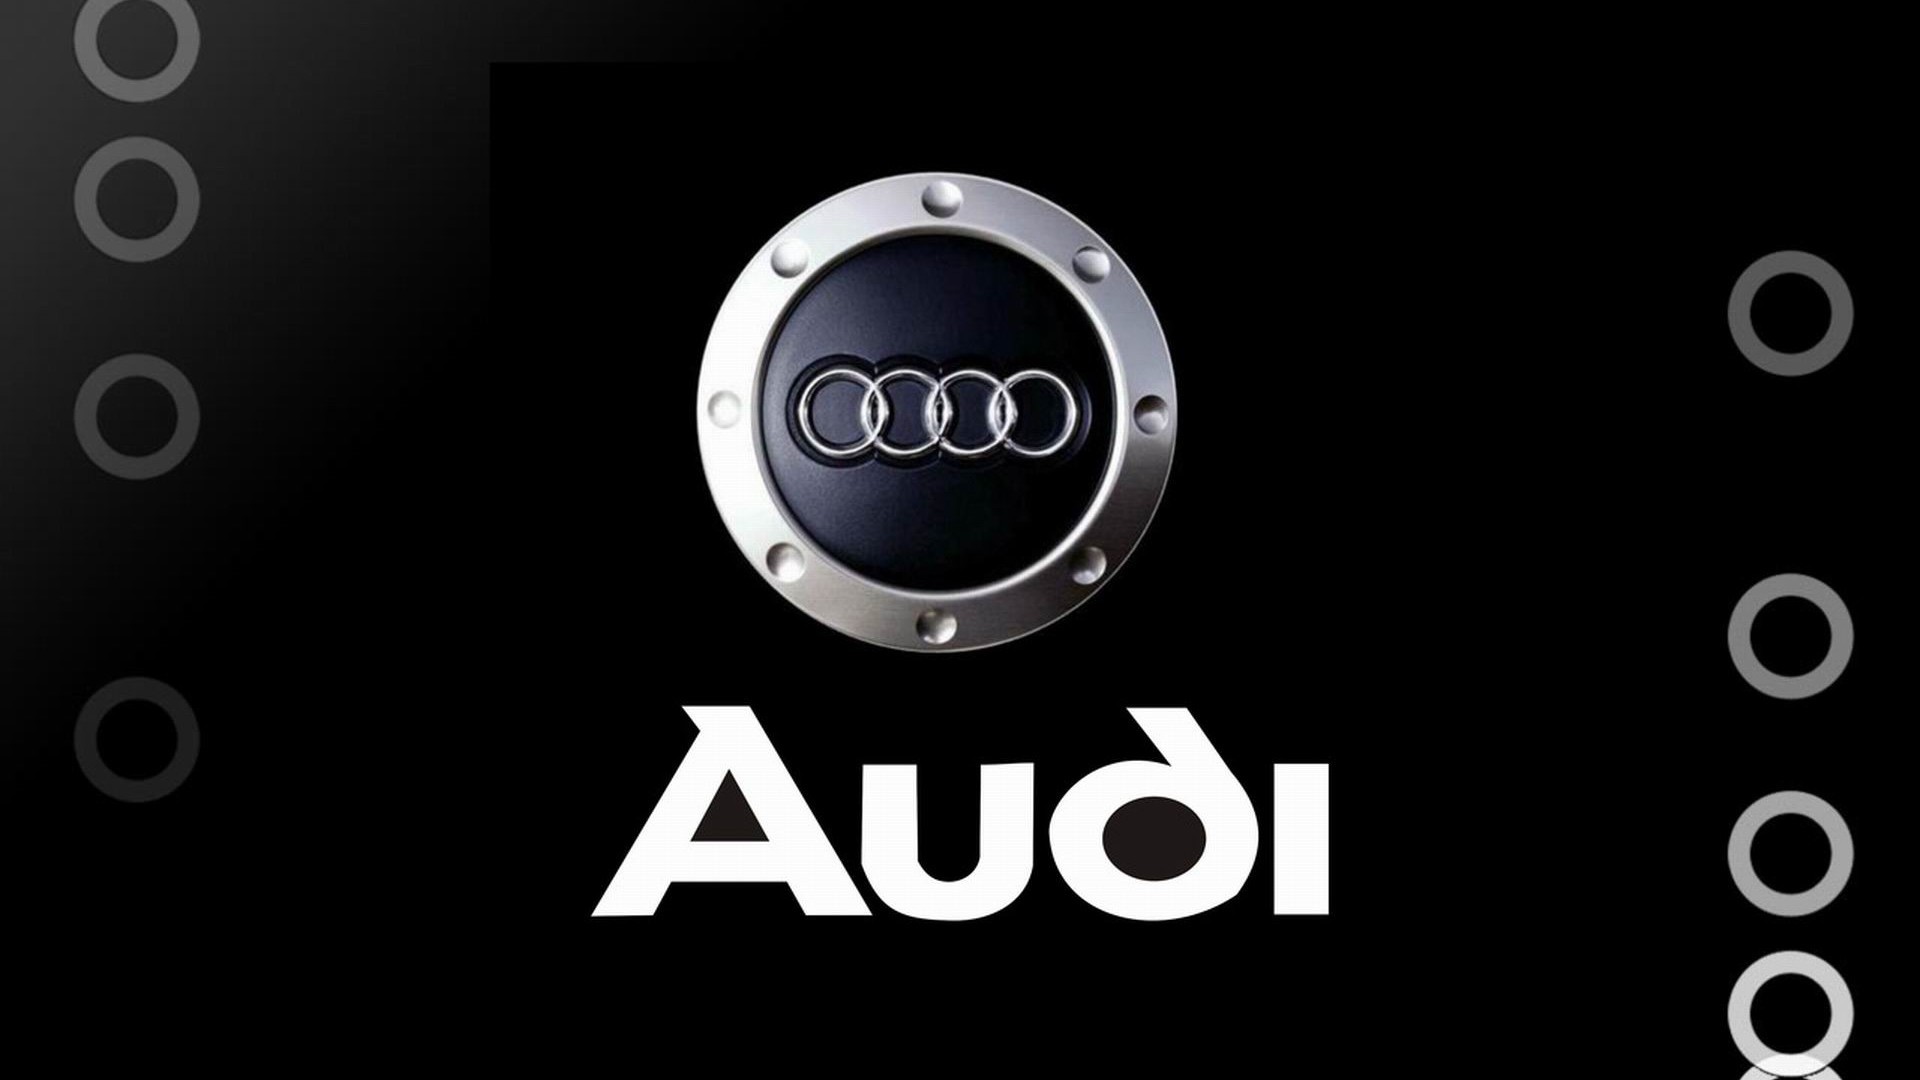 1920x1080 Audi Brand Logo Design Background HD Wallpaper Download awesome, Nice and  High Quality #HD